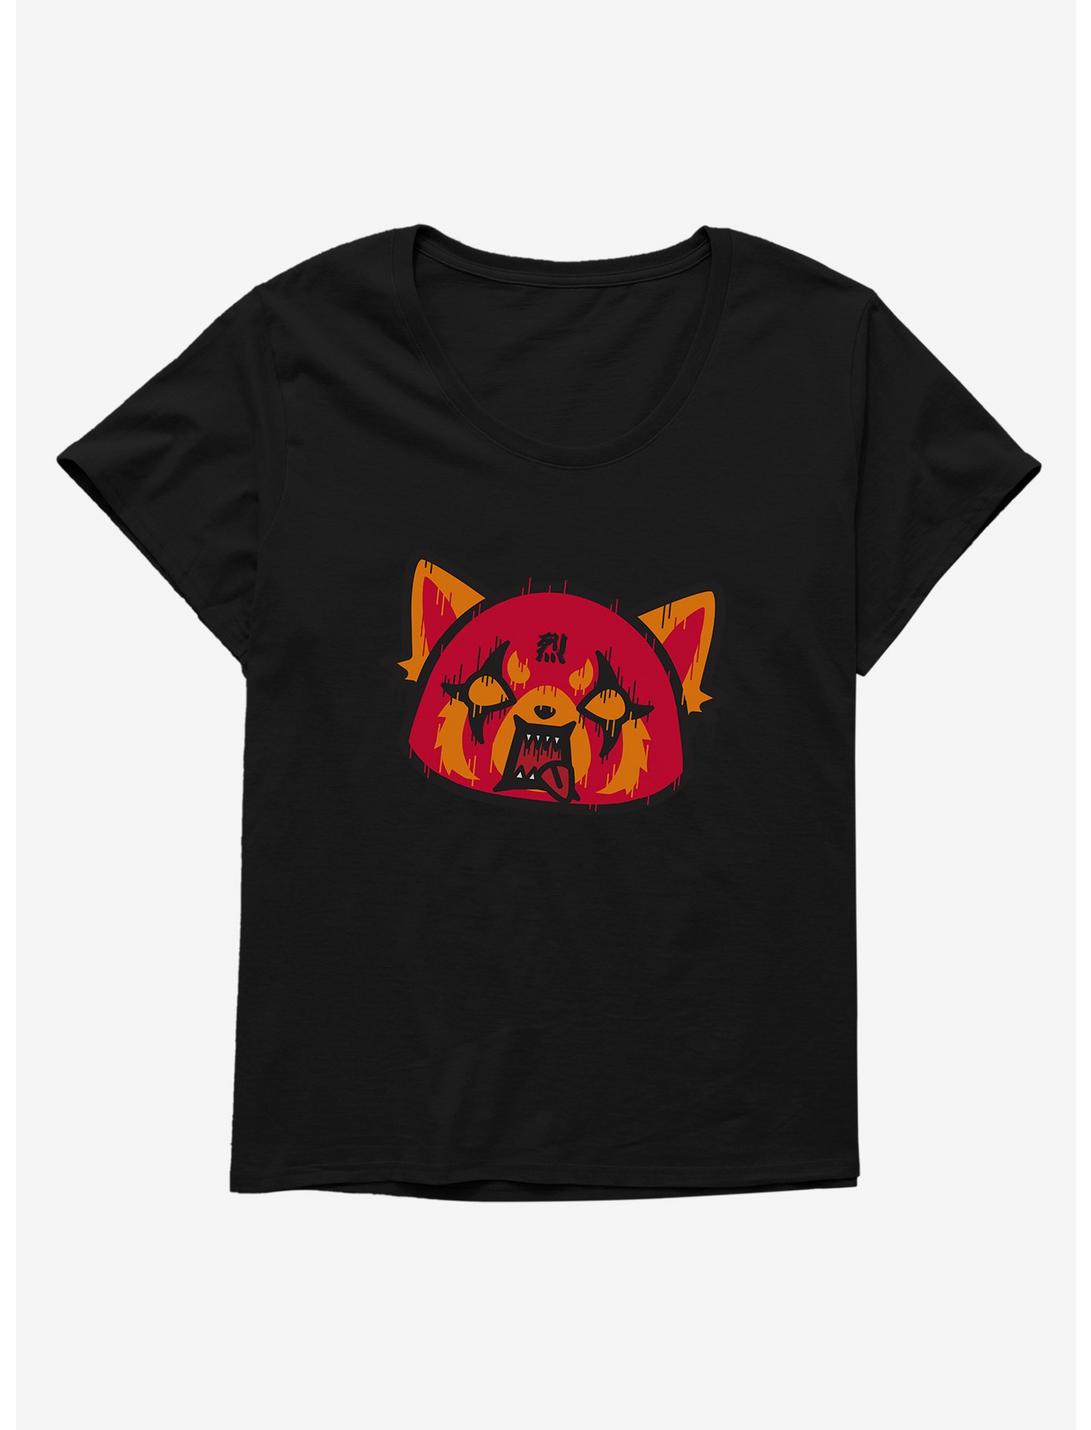 Aggretsuko Metal Rock Out To The Max Womens T-Shirt Plus Size, , hi-res